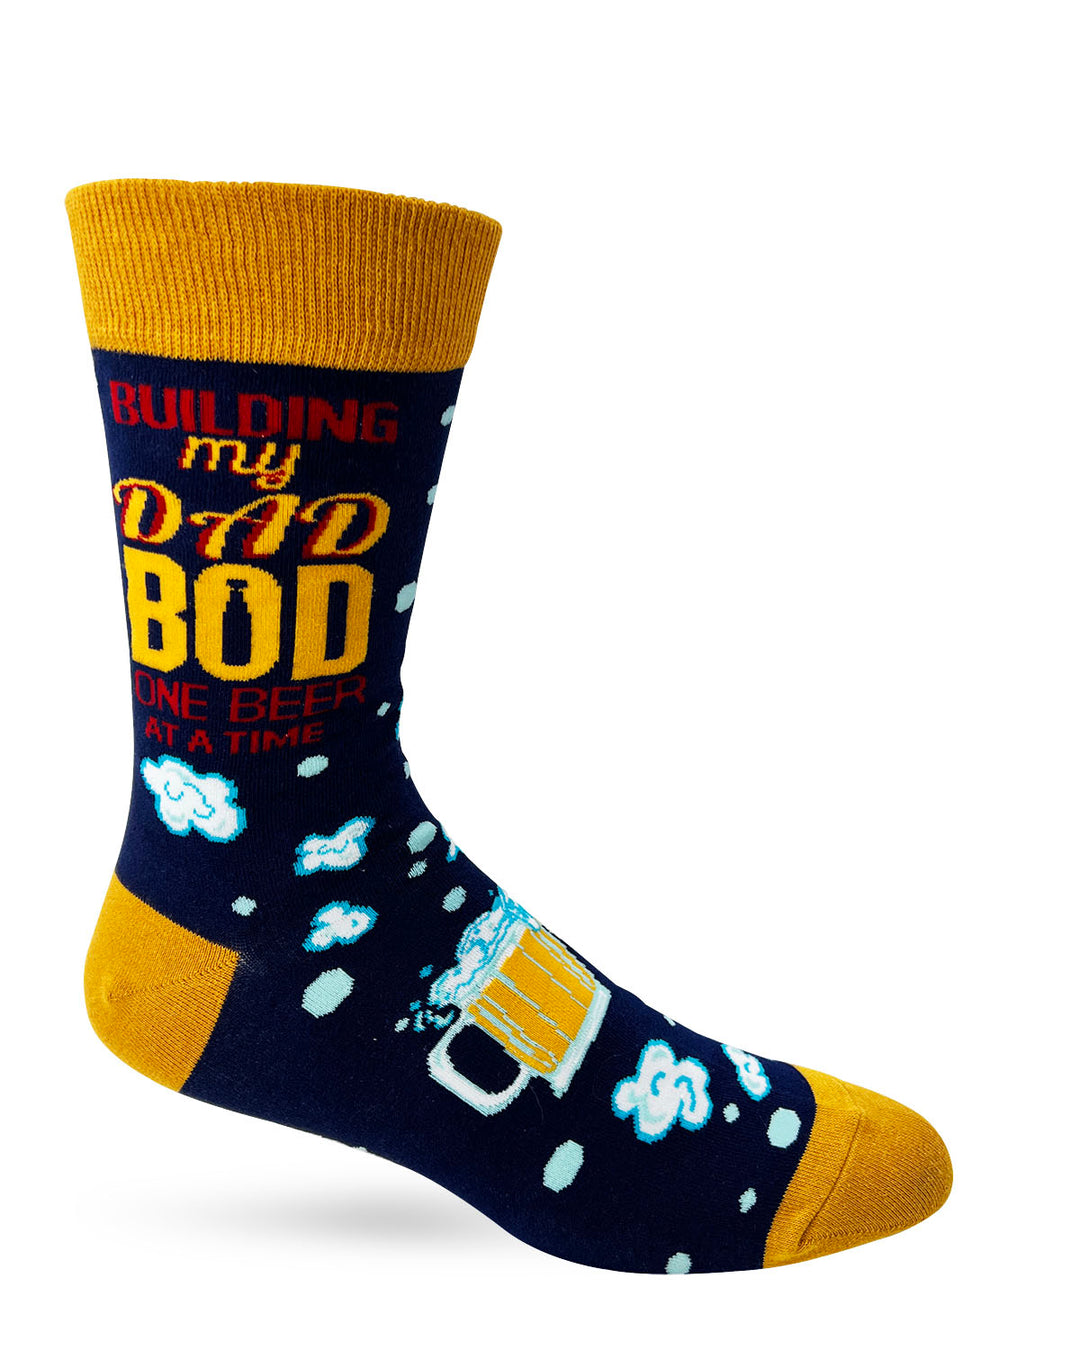 Building My Dad Bod One Beer At A Time Men's Novelty Crew Socks